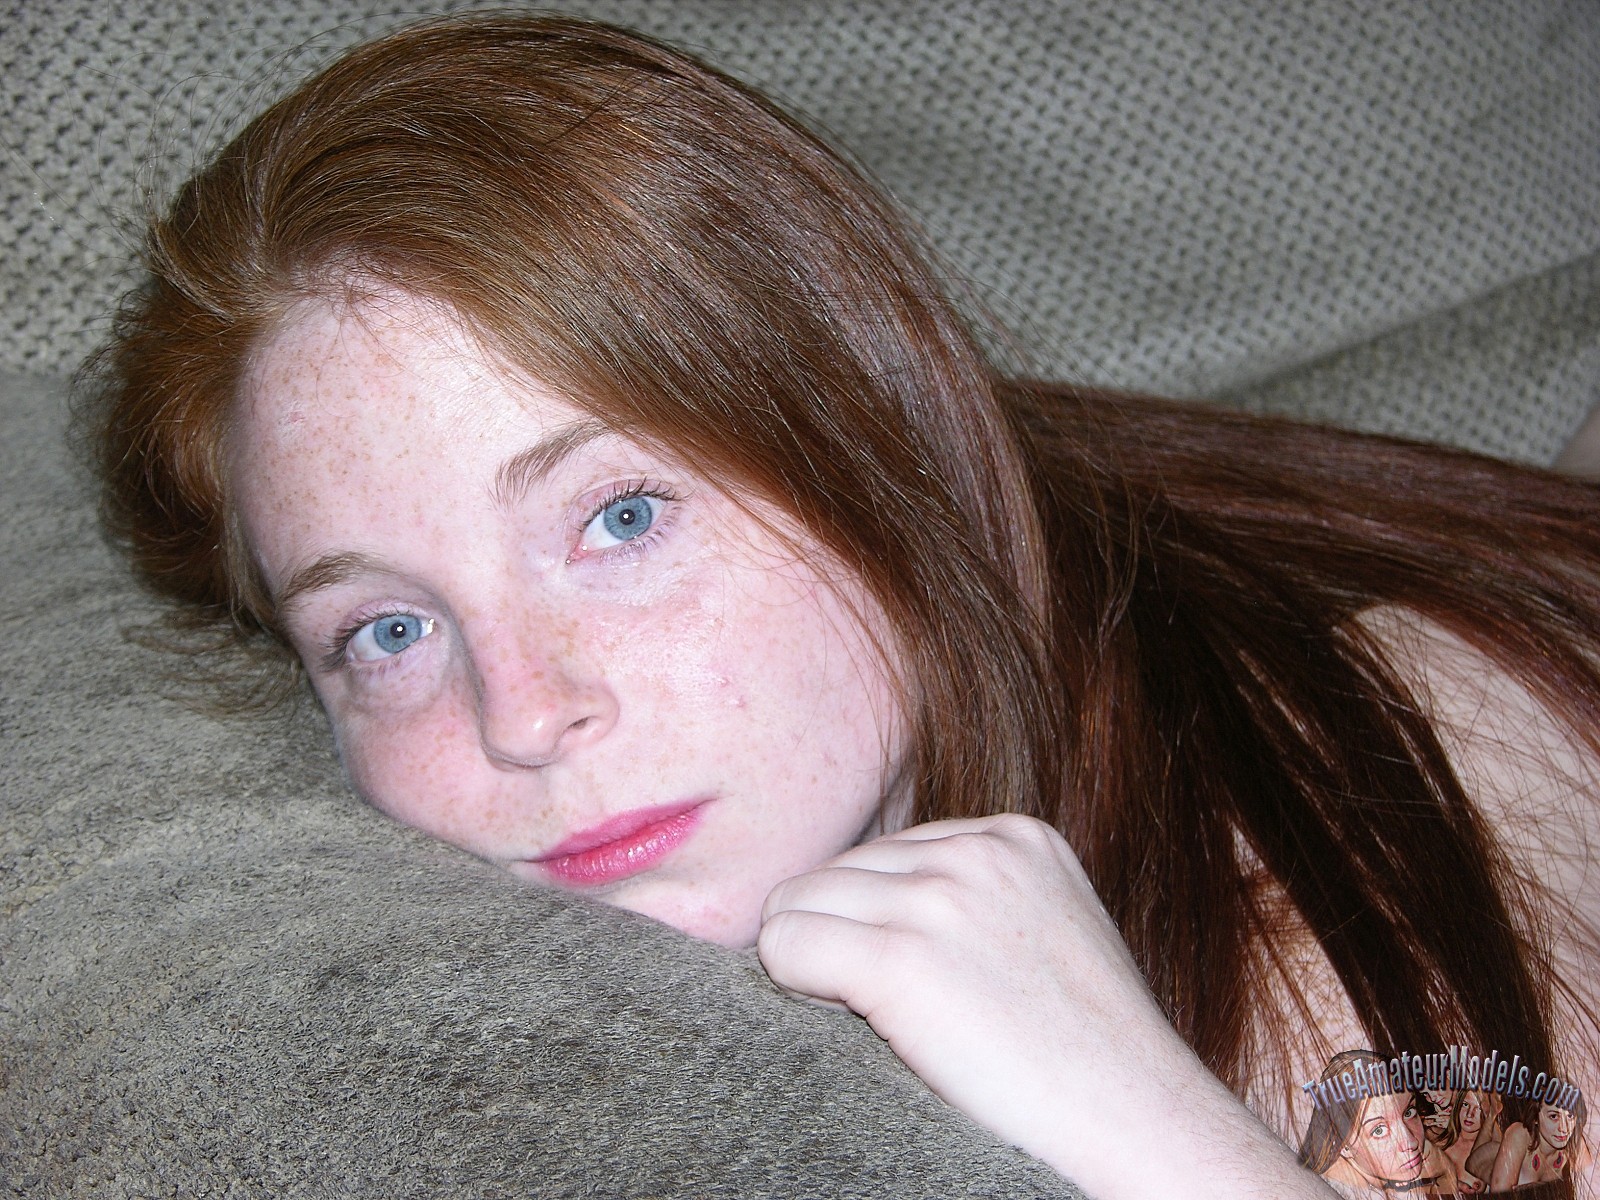 Rehdead Amateur Teen With Freckles Shows Hairy Pussy photo image